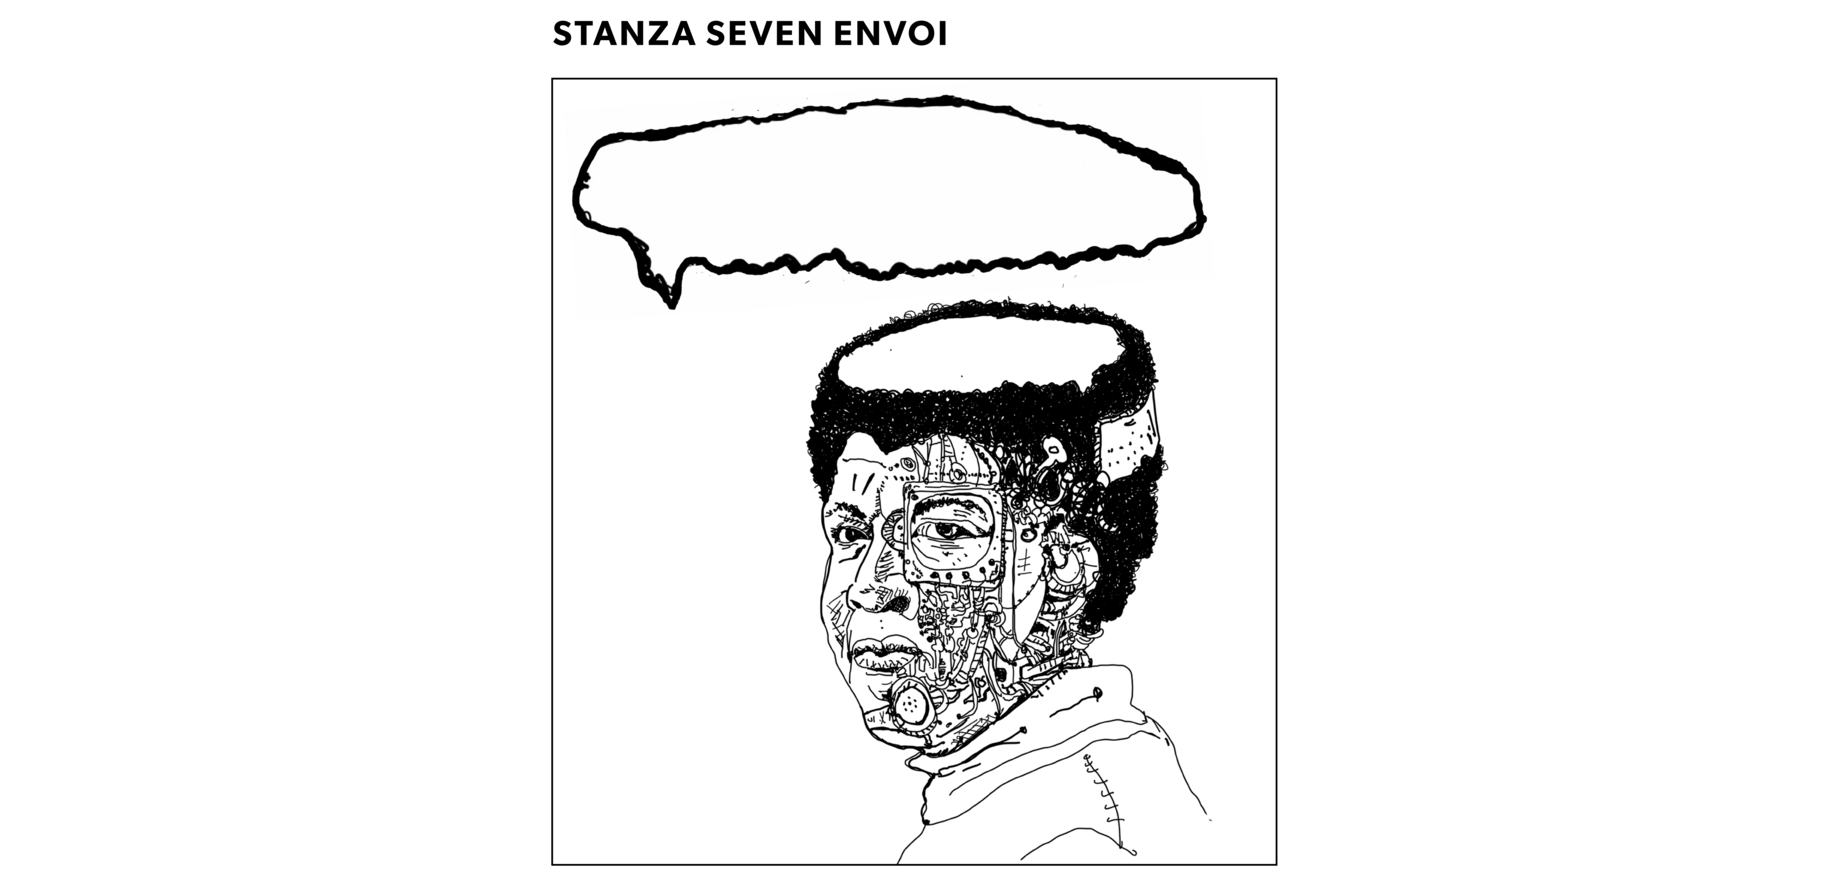 Drawing: Stanza 7 is an empty speech bubble above Octavia Butler’s head, and her head is missing the very top.